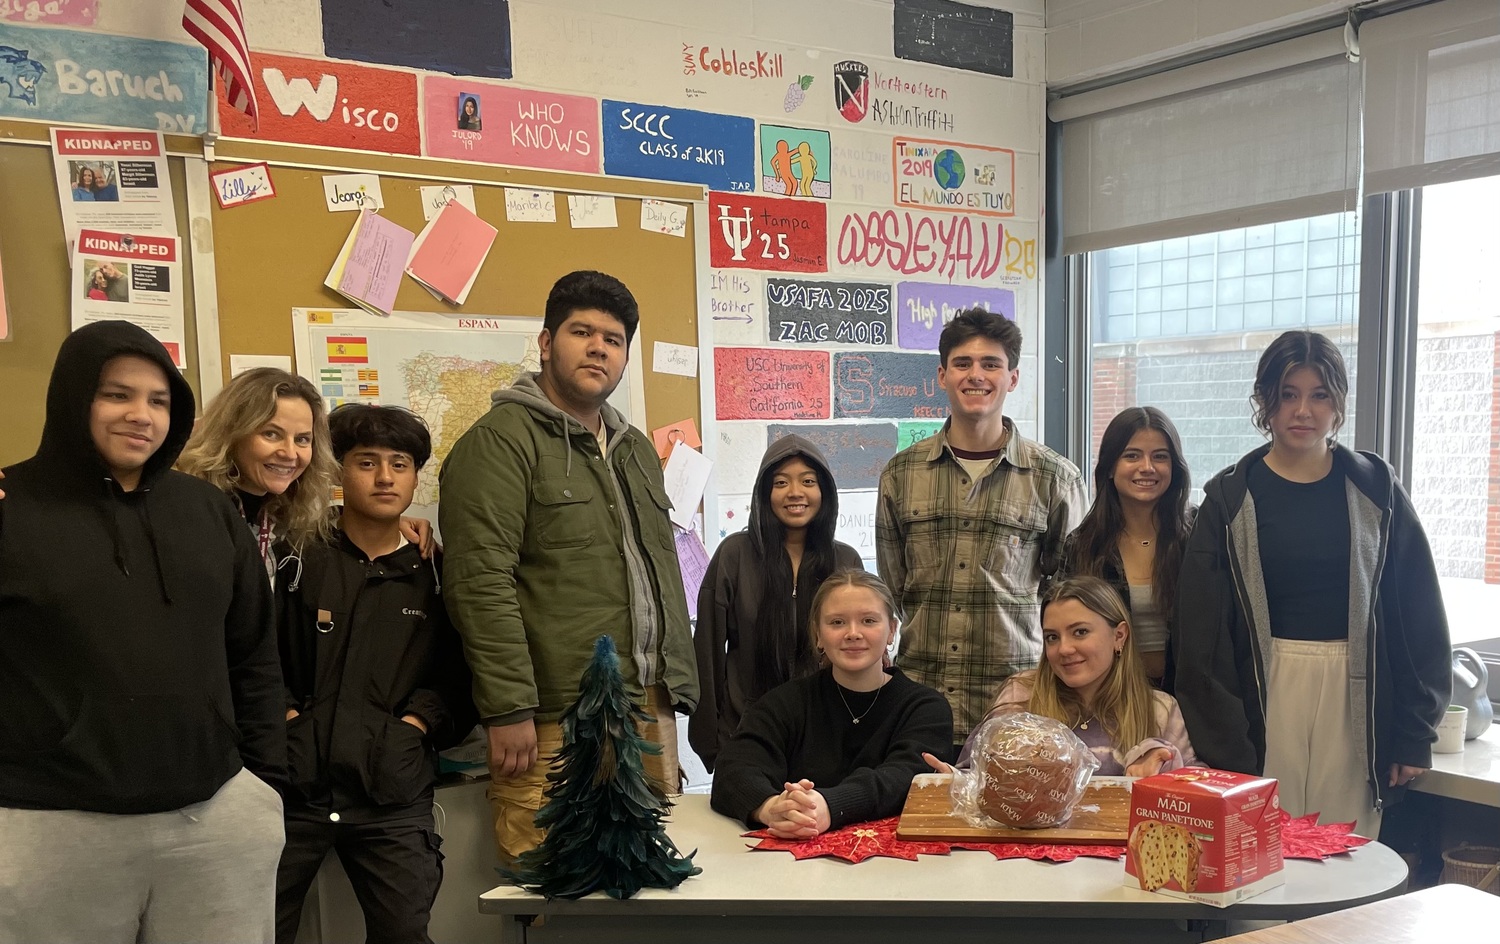 Southampton High School students will receive additional educational materials and scholarships thanks to a grant from the Italian American Committee on Education.  COURTESY SOUTHAMPTON SCHOOL DISTRICT